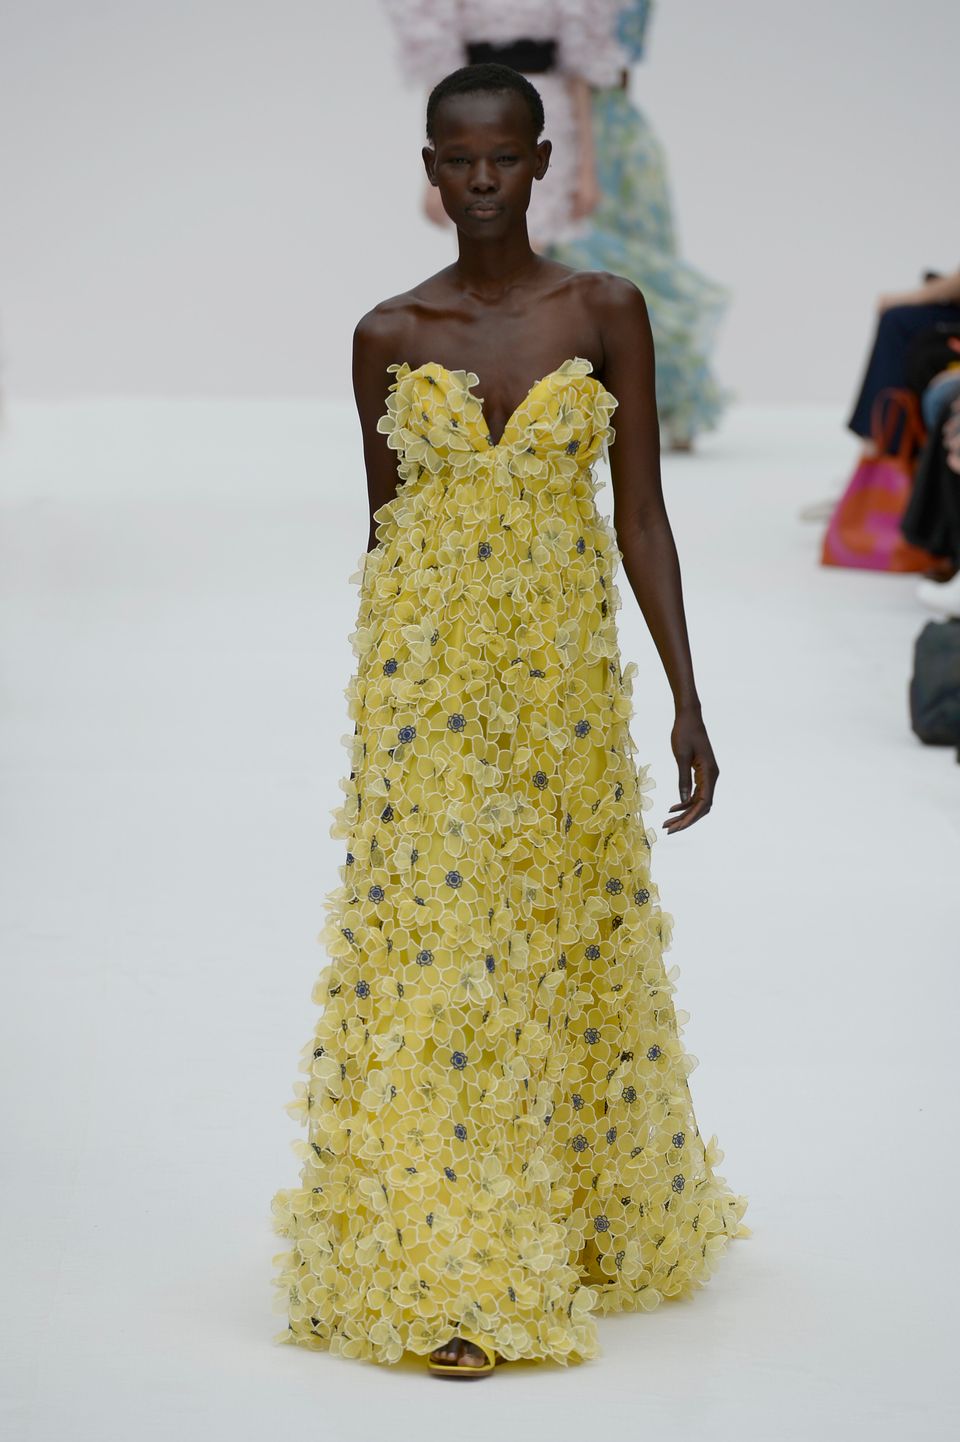 27 Of The Most Beautiful Dresses At New York Fashion Week | HuffPost Life